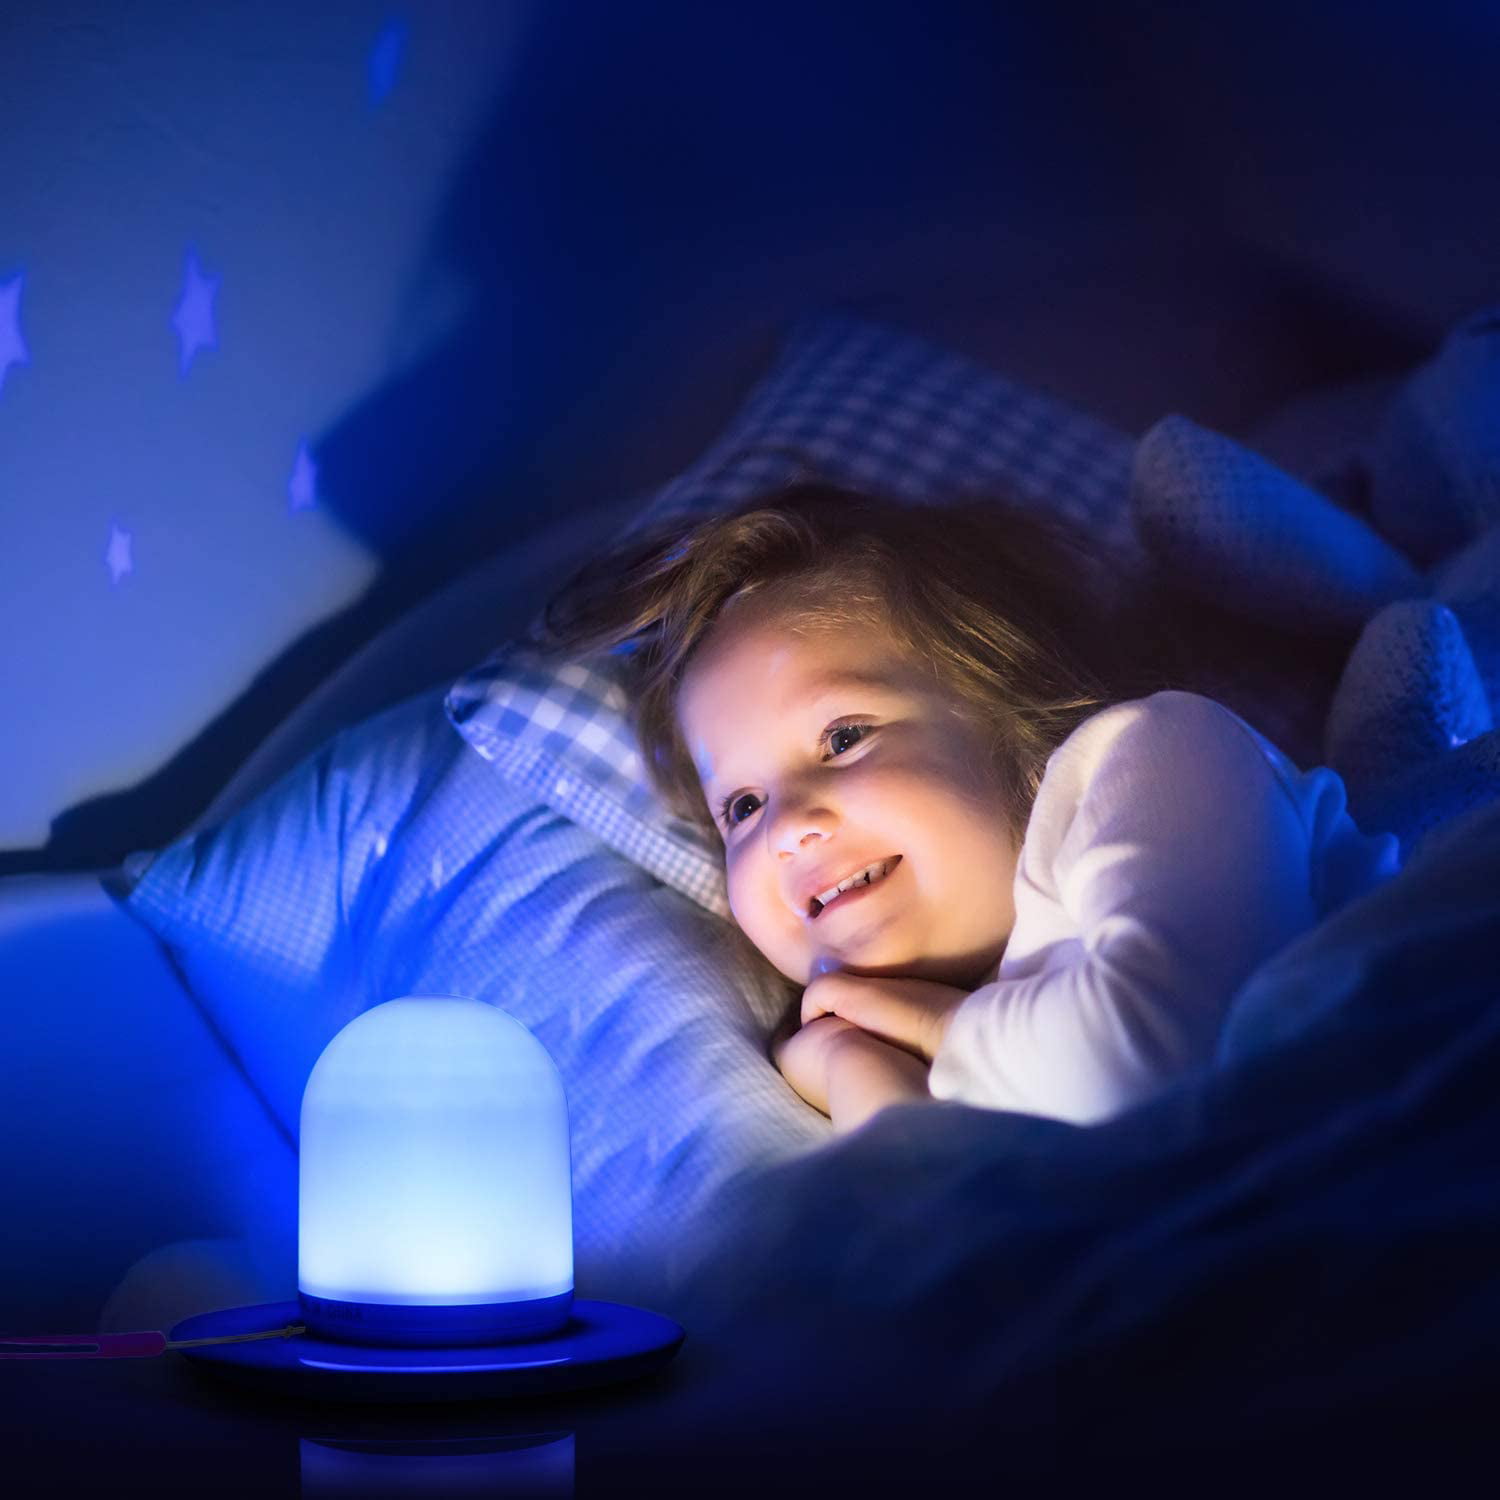 Warm White & RGB Color Changing Dimmable Lamp LED Nursery Night Light for Kids Rechargeable Night Light with Remote Control for Kids Baby Bedroom Table Living Office by PeakPlus 